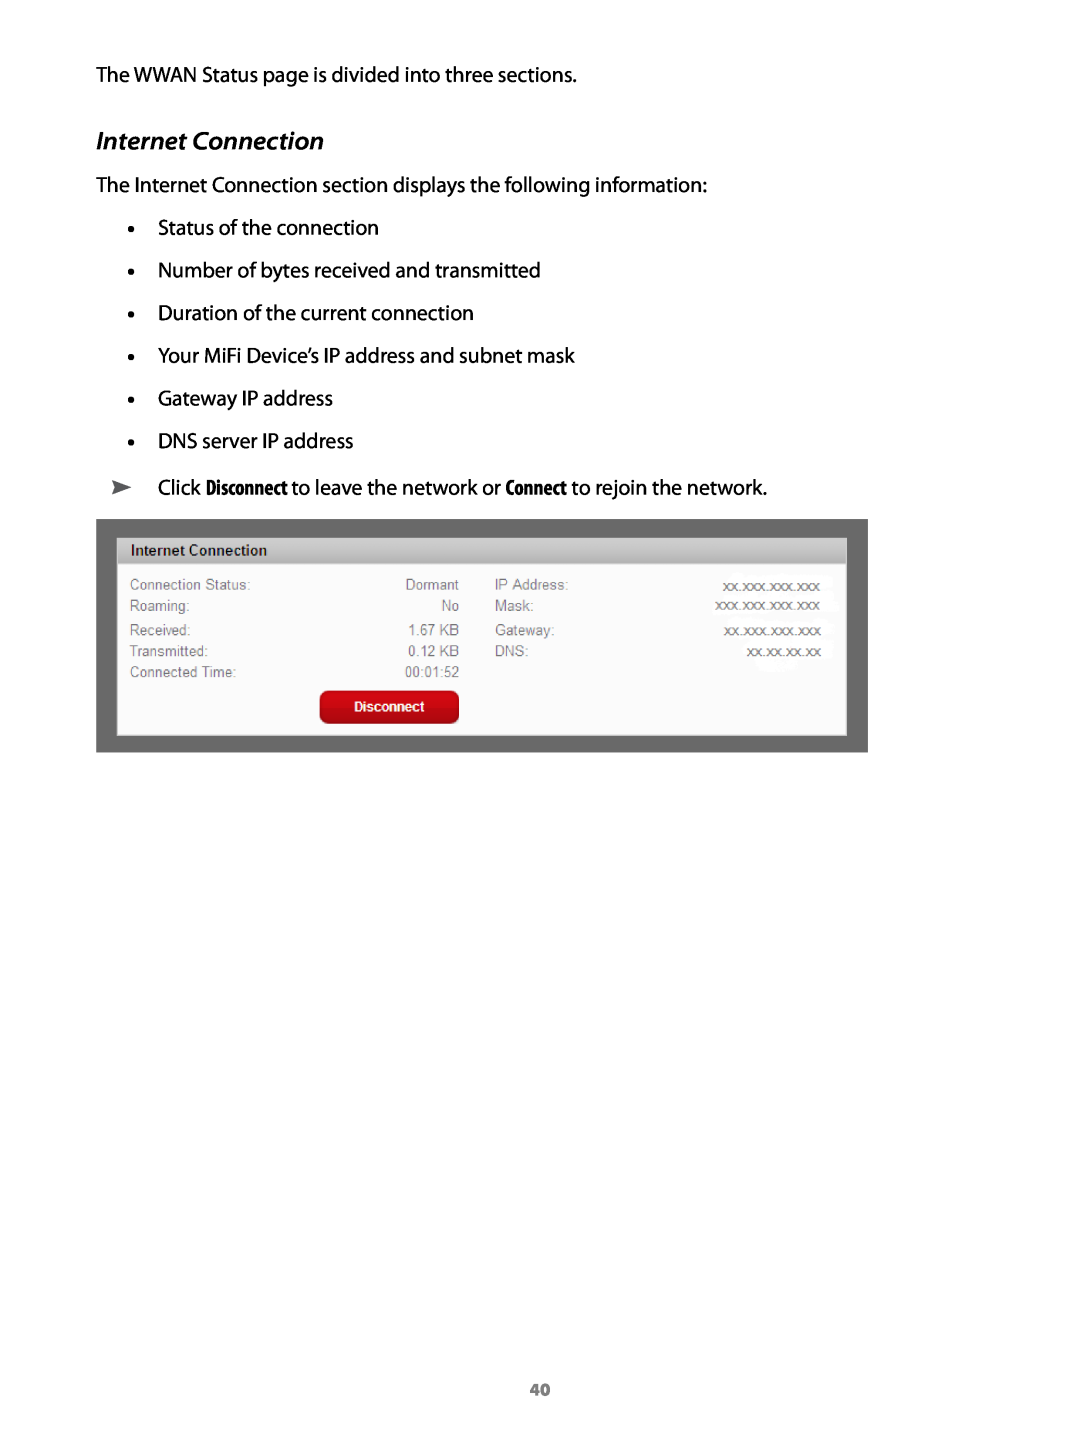 Virgin Mobile 2200 manual Internet Connection, The WWAN Status page is divided into three sections, DNS server IP address 